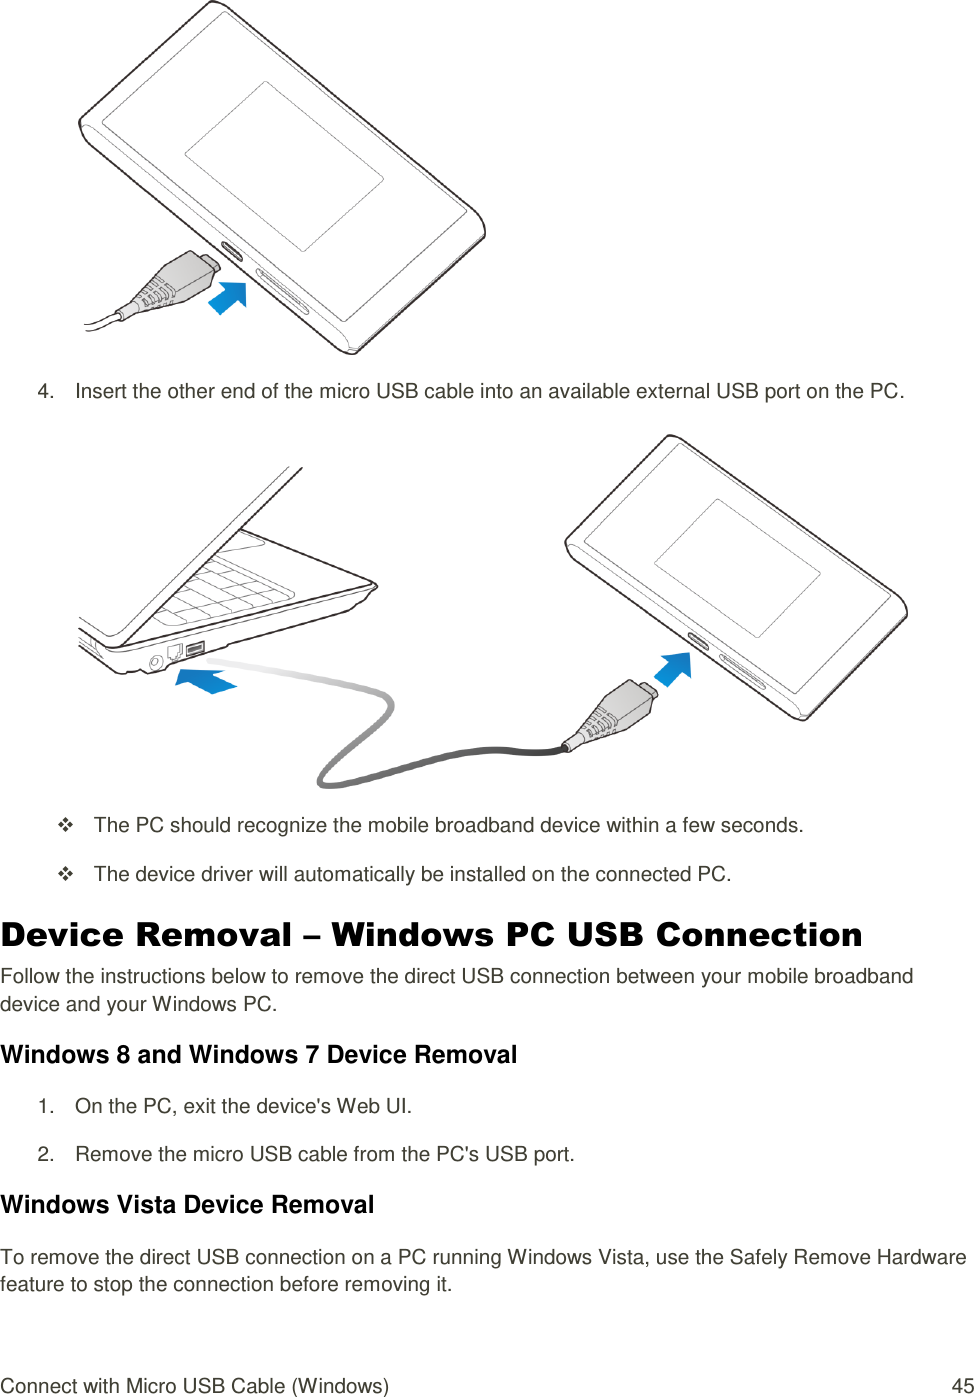 Connect with Micro USB Cable (Windows)  45   4.  Insert the other end of the micro USB cable into an available external USB port on the PC.     The PC should recognize the mobile broadband device within a few seconds.   The device driver will automatically be installed on the connected PC. Device Removal – Windows PC USB Connection Follow the instructions below to remove the direct USB connection between your mobile broadband device and your Windows PC. Windows 8 and Windows 7 Device Removal 1.  On the PC, exit the device&apos;s Web UI. 2.  Remove the micro USB cable from the PC&apos;s USB port. Windows Vista Device Removal To remove the direct USB connection on a PC running Windows Vista, use the Safely Remove Hardware feature to stop the connection before removing it. 